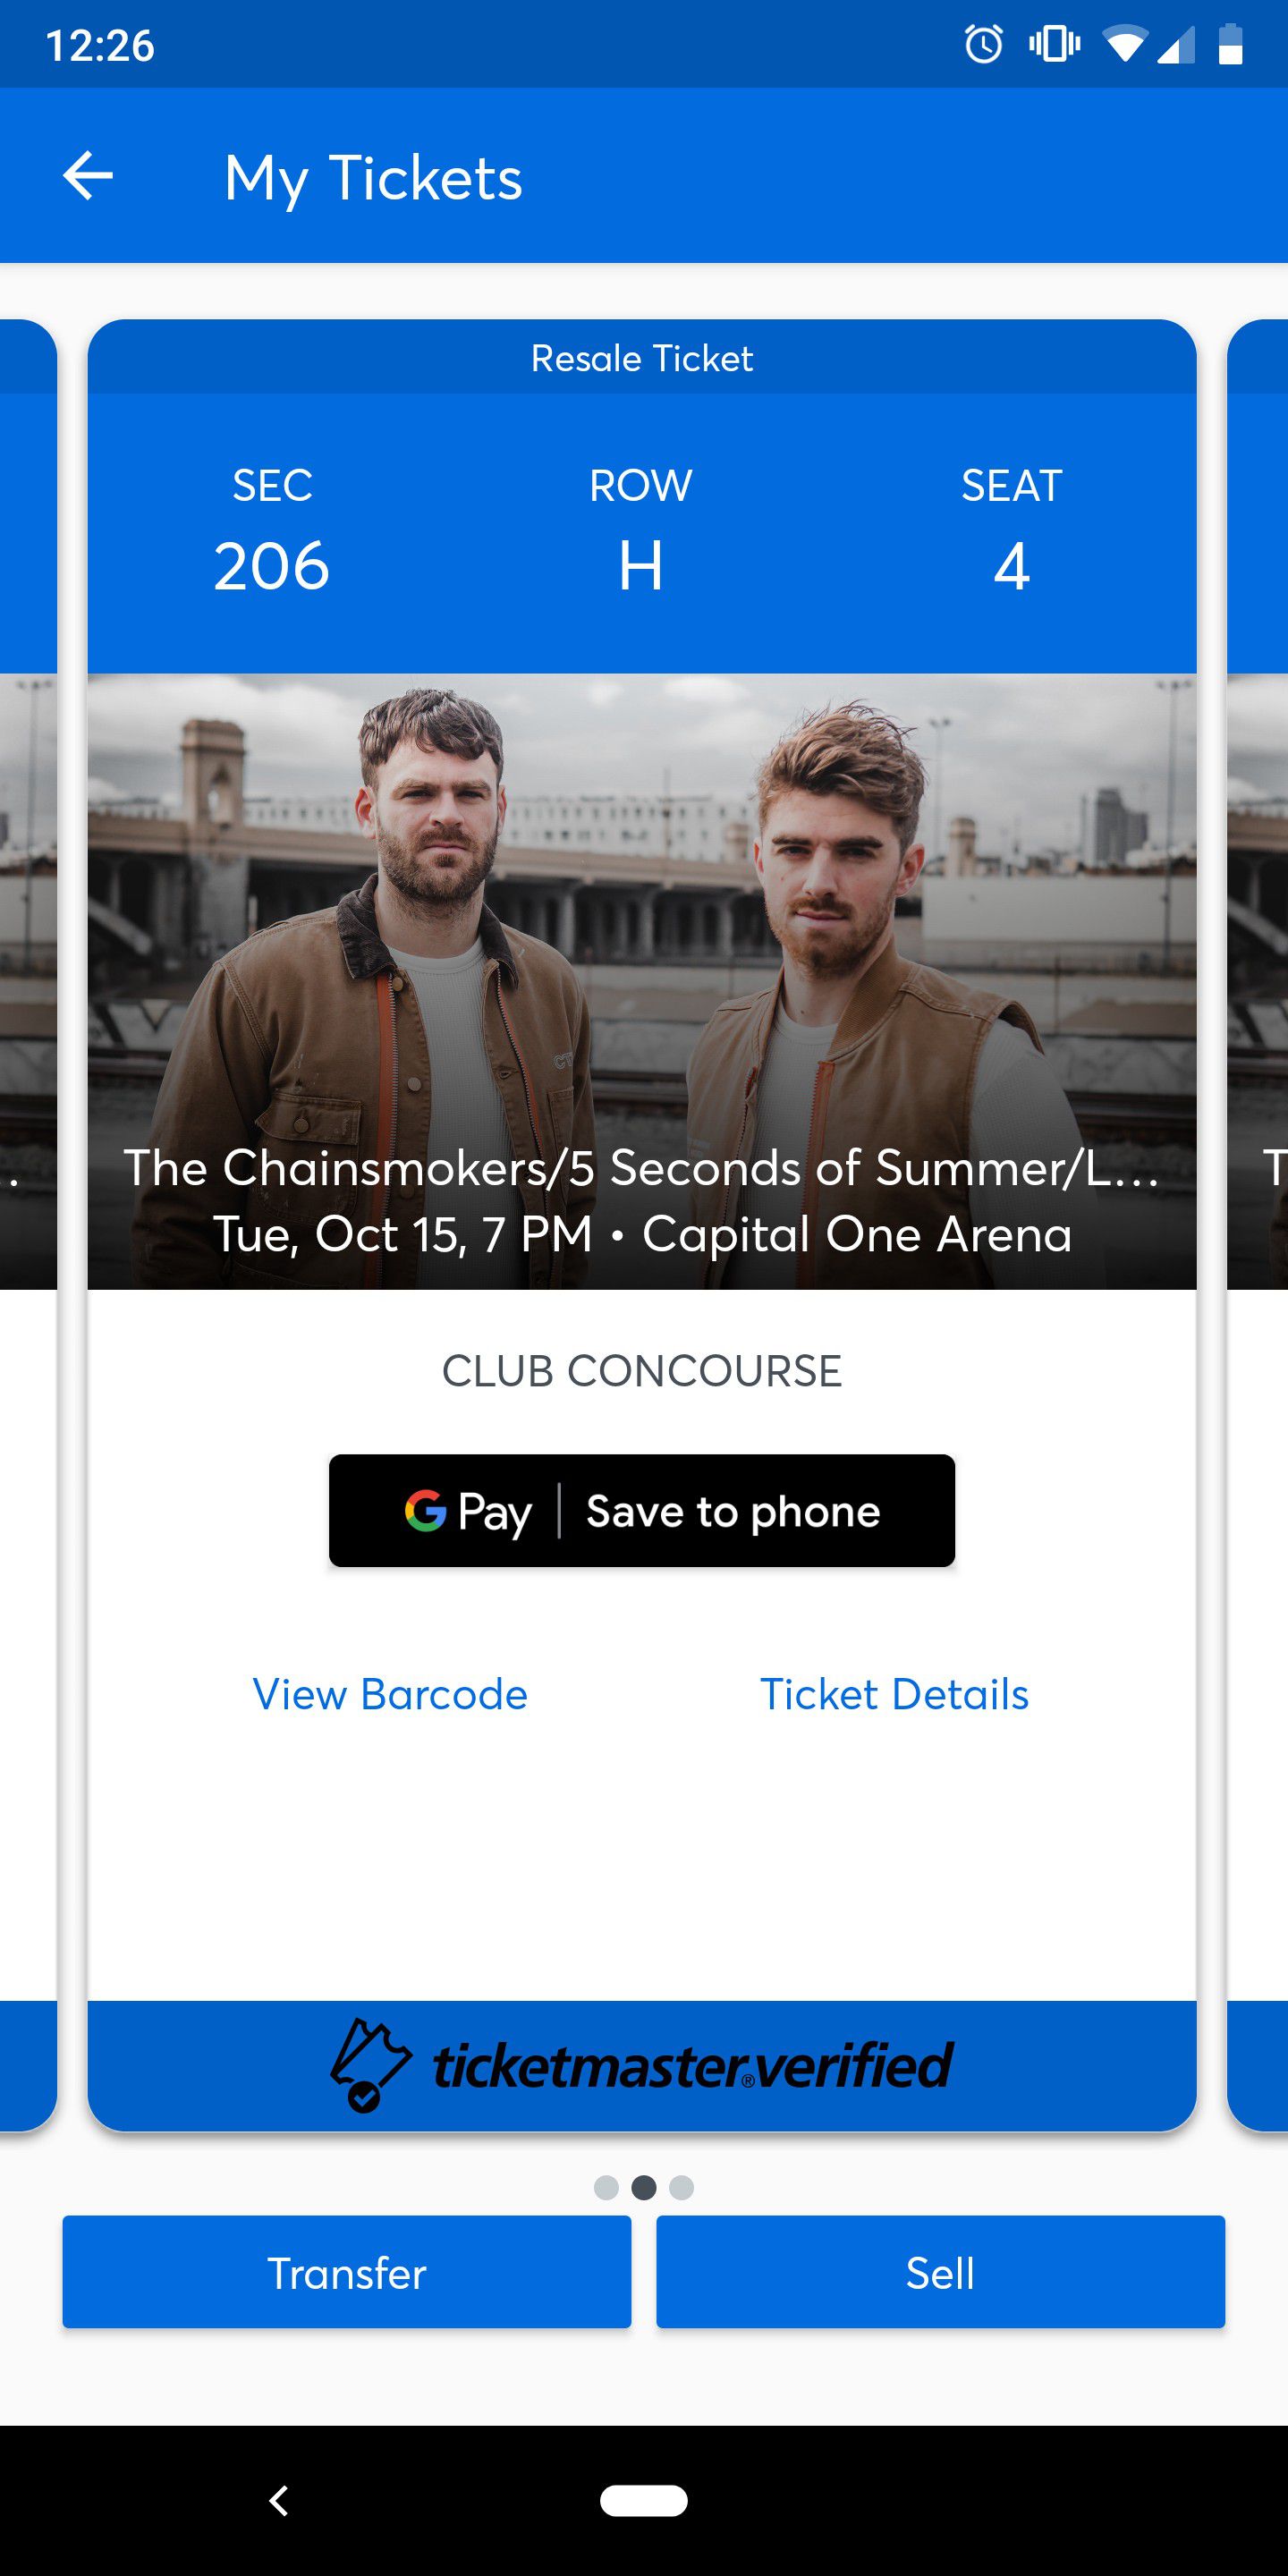 1, 2 or 3 tickets to The Chainsmokers/5 Seconds of Summer/Lennon Stella concert